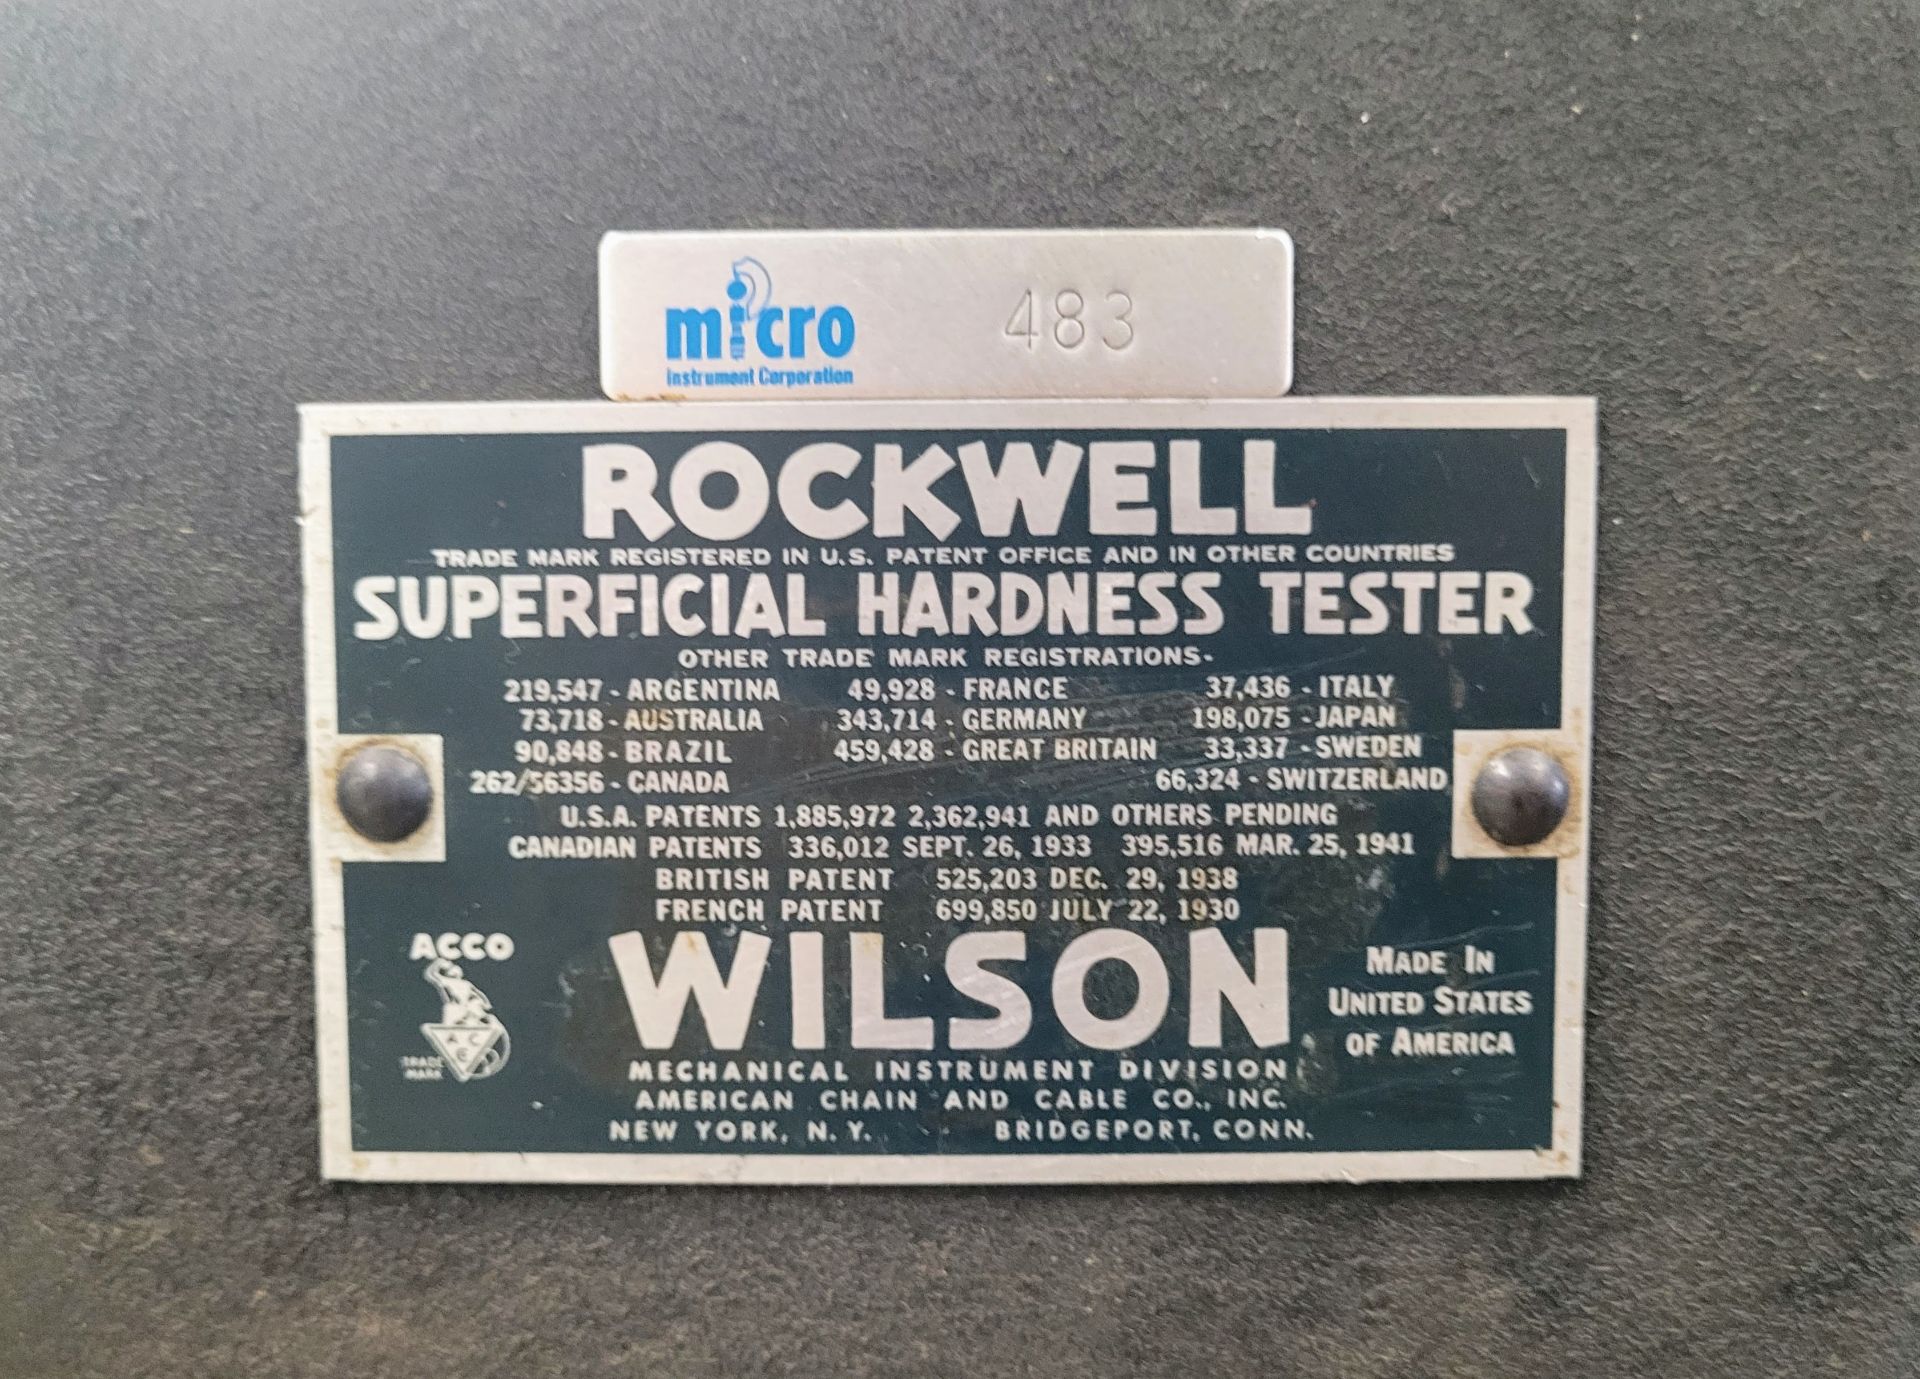 ROCKWELL SUPERFICIAL HARDNESS TESTER - Image 6 of 6